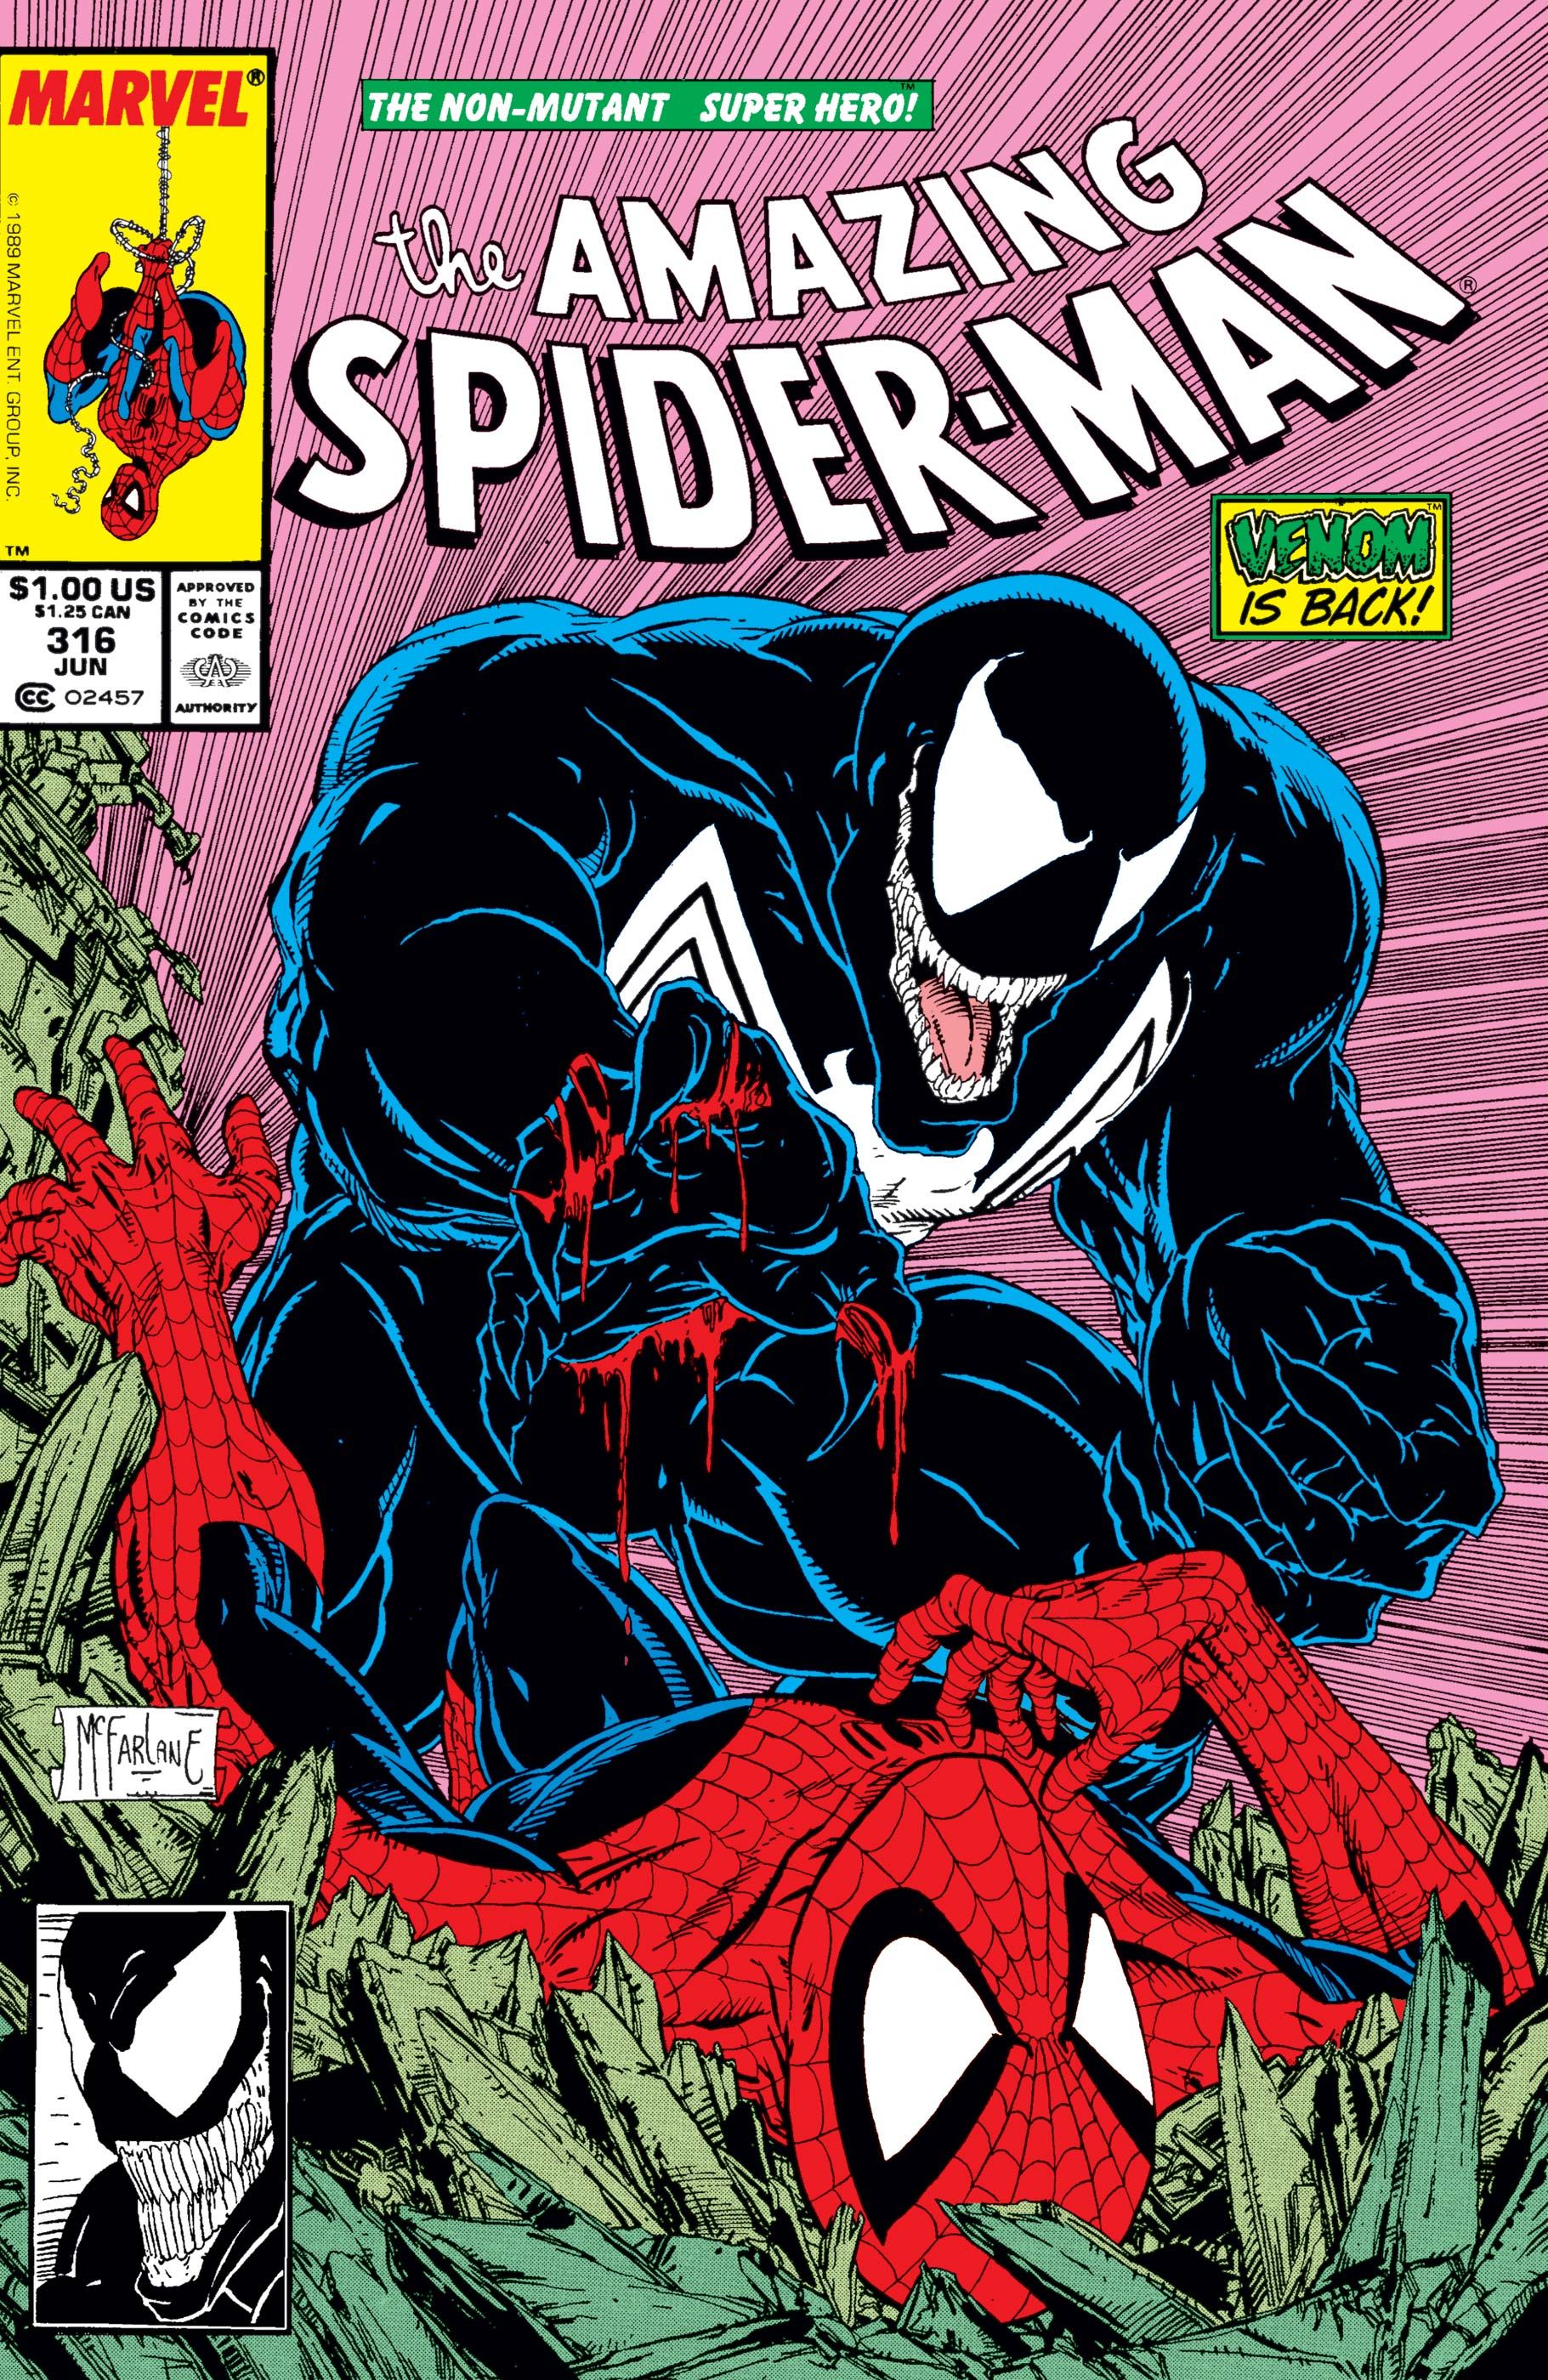 Amazing Spider-Man #316 cover by Todd McFarlane, featuring Venom smashing Spider-Man into the ground